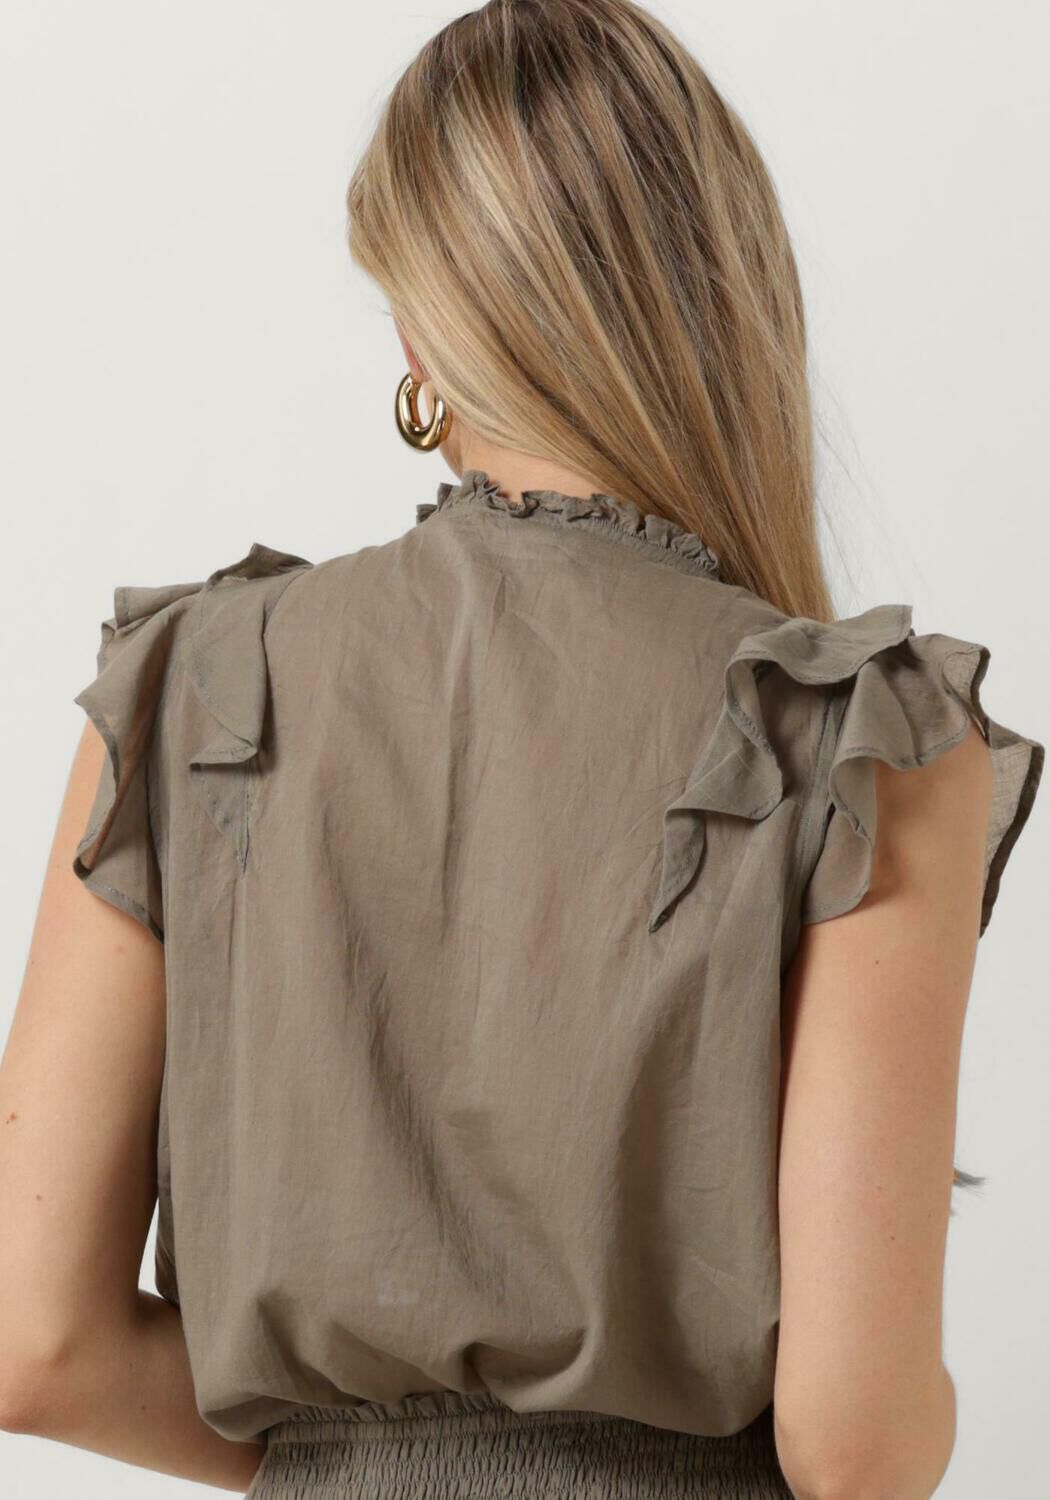 NOTRE-V Dames Tops & T-shirts Voile Top Short Sleeves Taupe